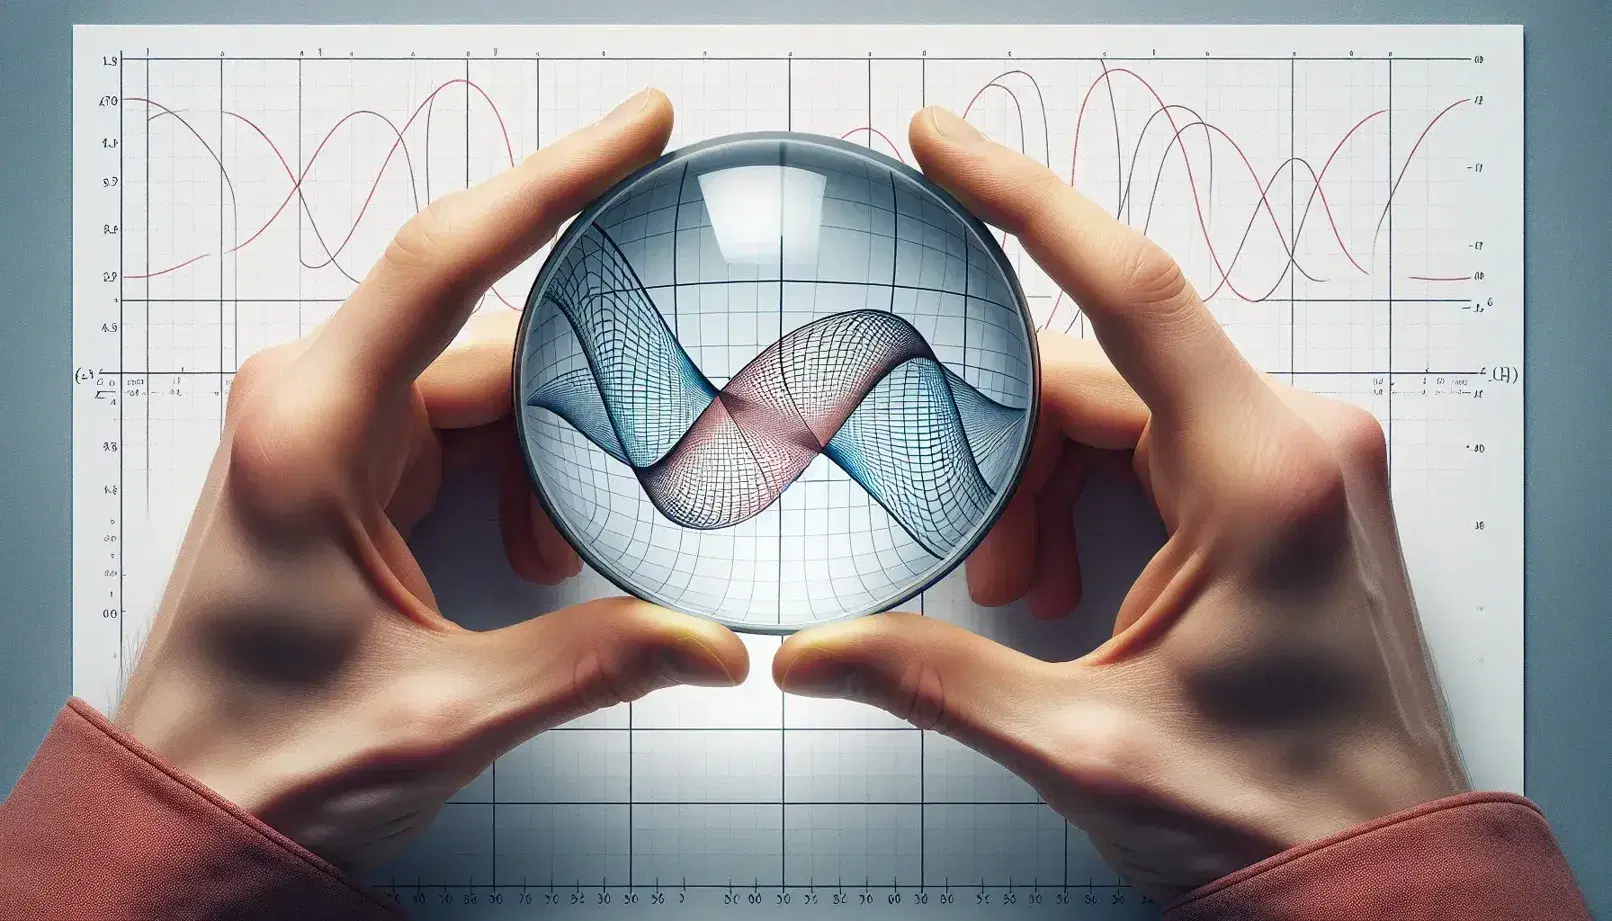 Hands holding a magnifying spherical glass lens over a mathematical graph with intersecting blue and red curves on squared paper.